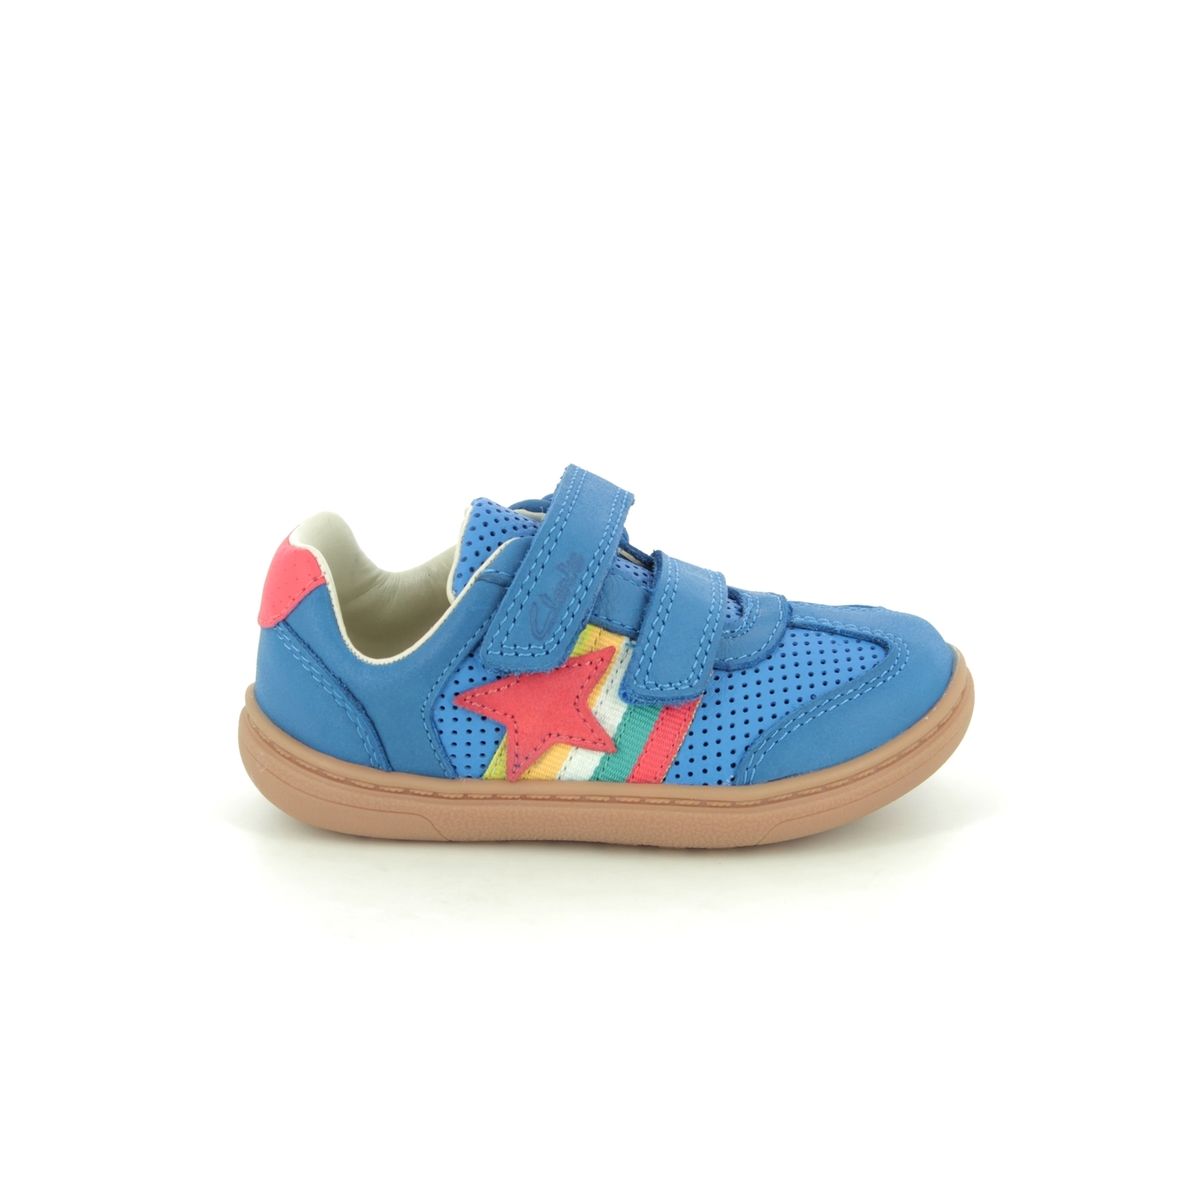 Clarks Flash Bright T Girls First Shoes